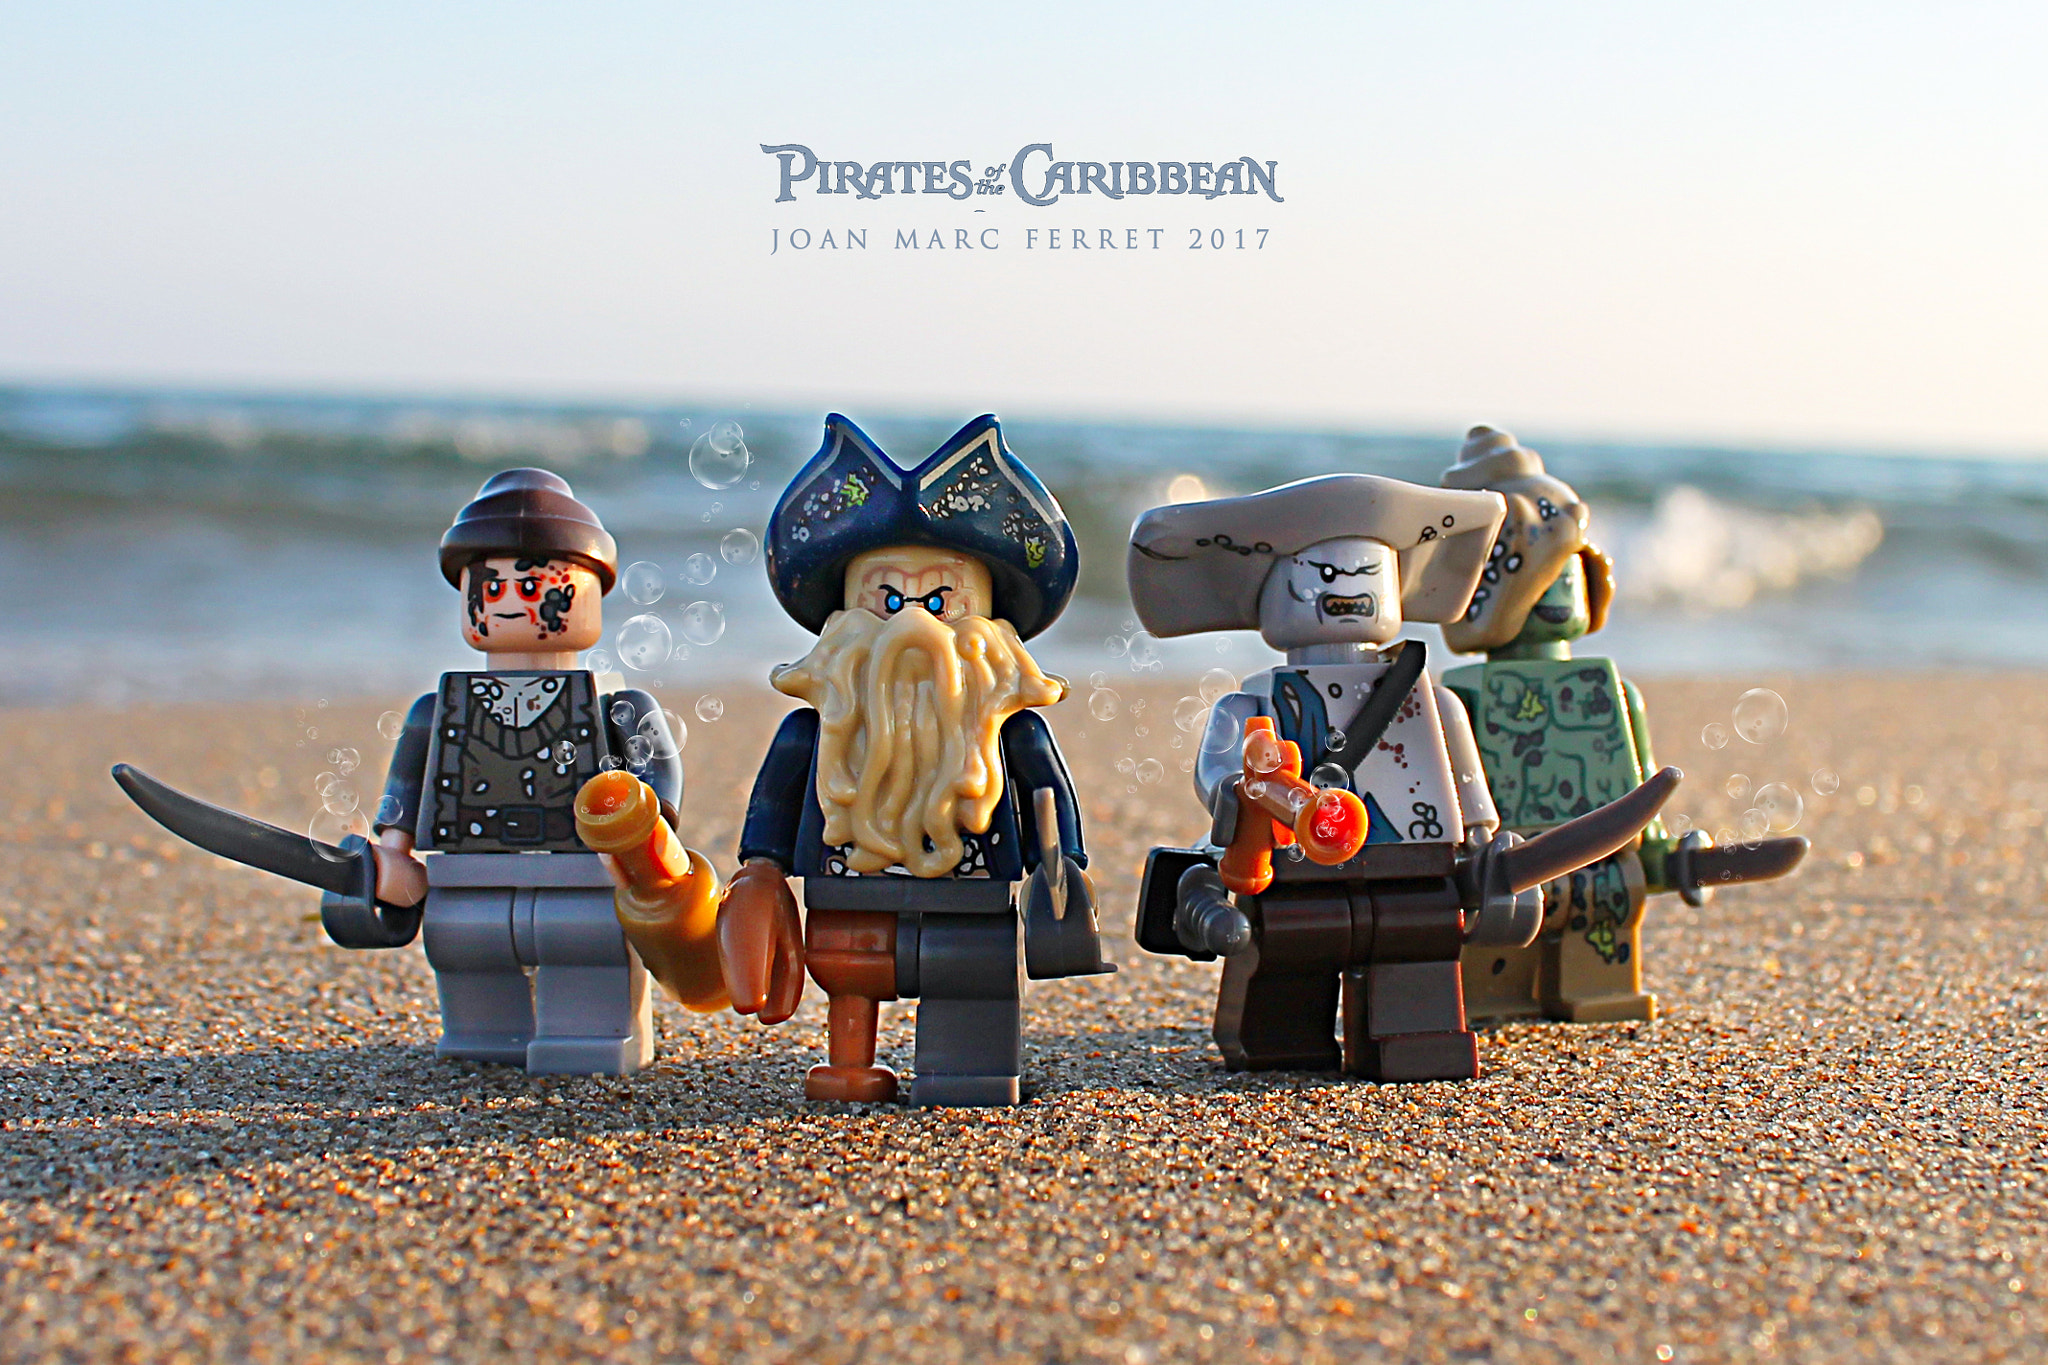 General 2048x1365 500px LEGO toys sand Pirates of the Caribbean 2017 (Year) Davy Jones figurines Joan Marc Ferret movie characters